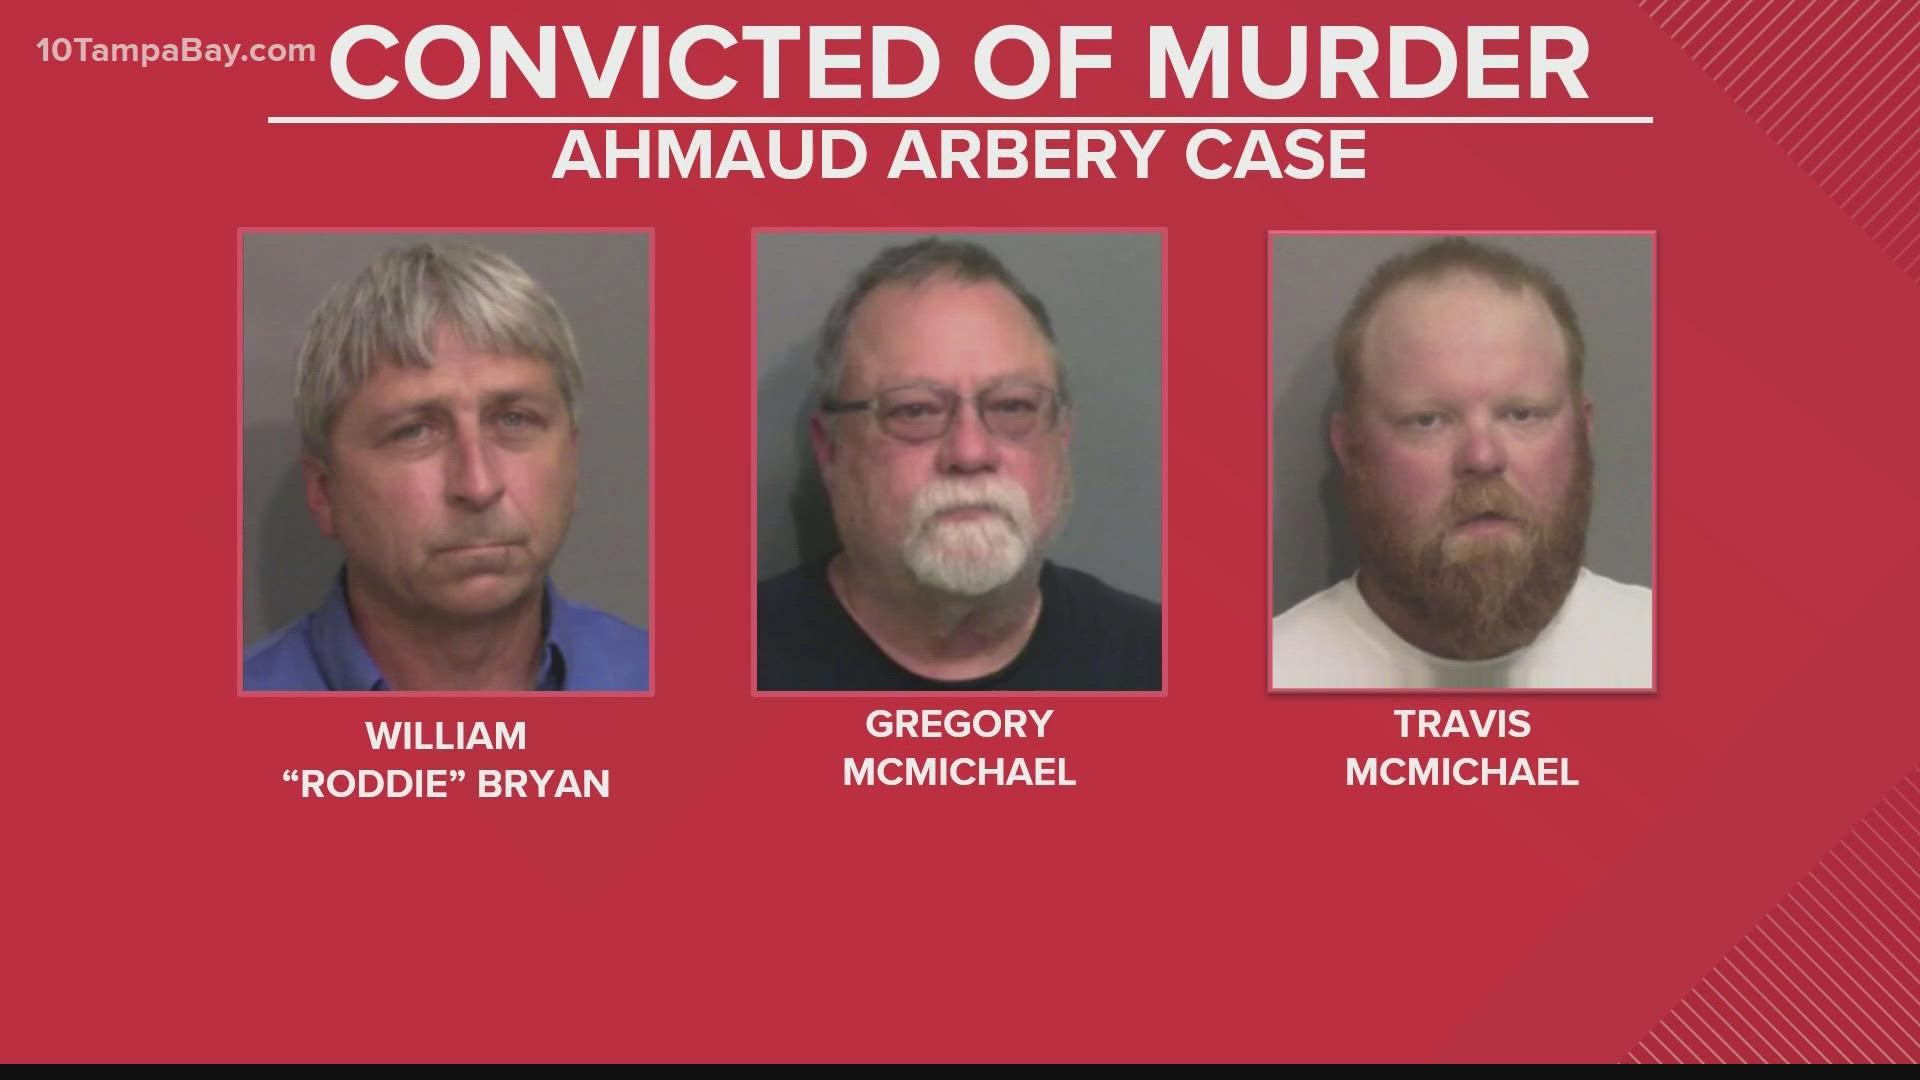 Travis McMichael, his father Gregory McMichael and William "Roddie" Bryan, who recorded the video, were all charged with murder in Arbery's death.